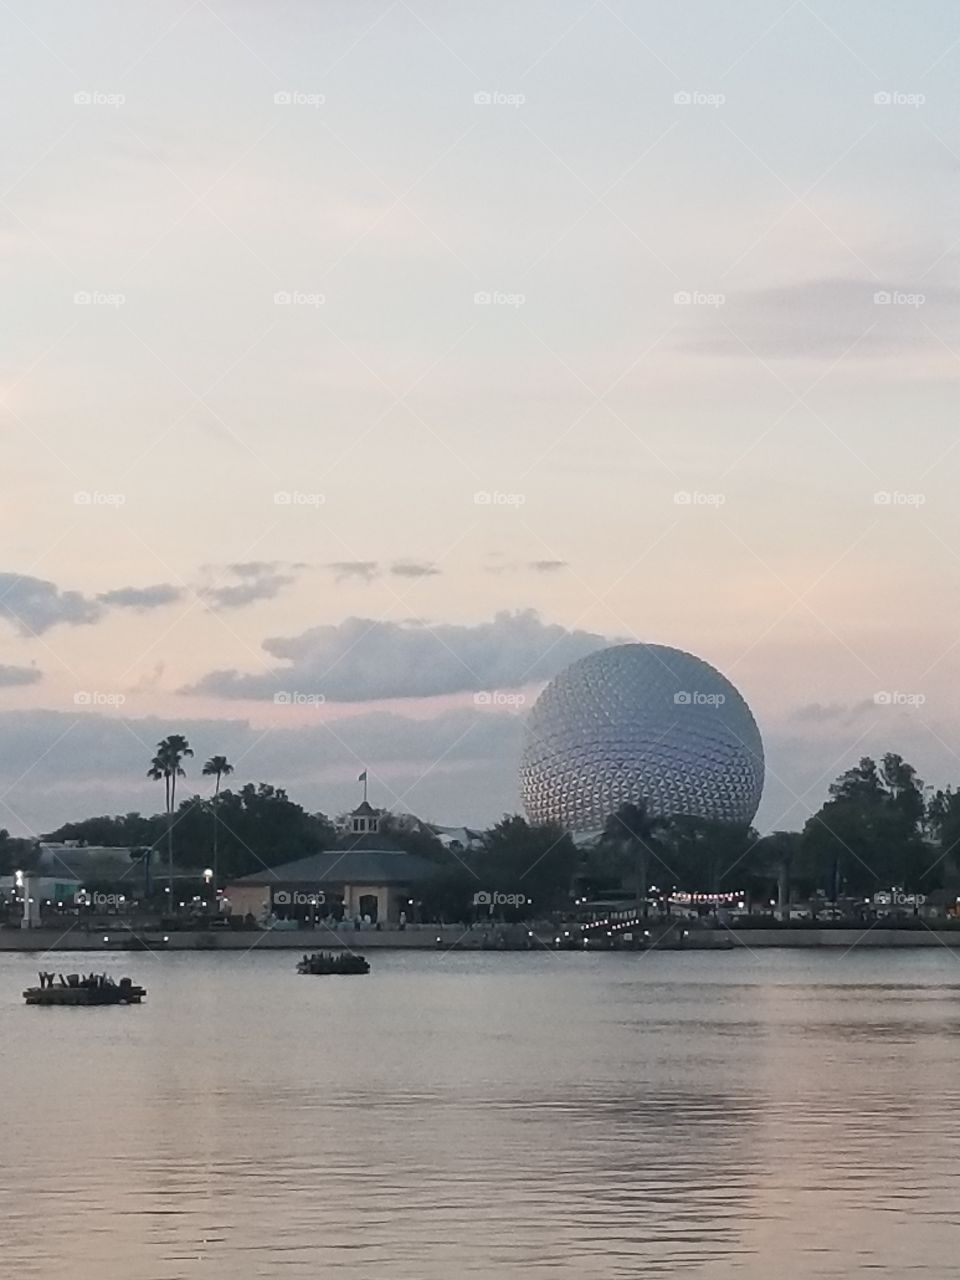 Spaceship Earth from the Water (Epcot)